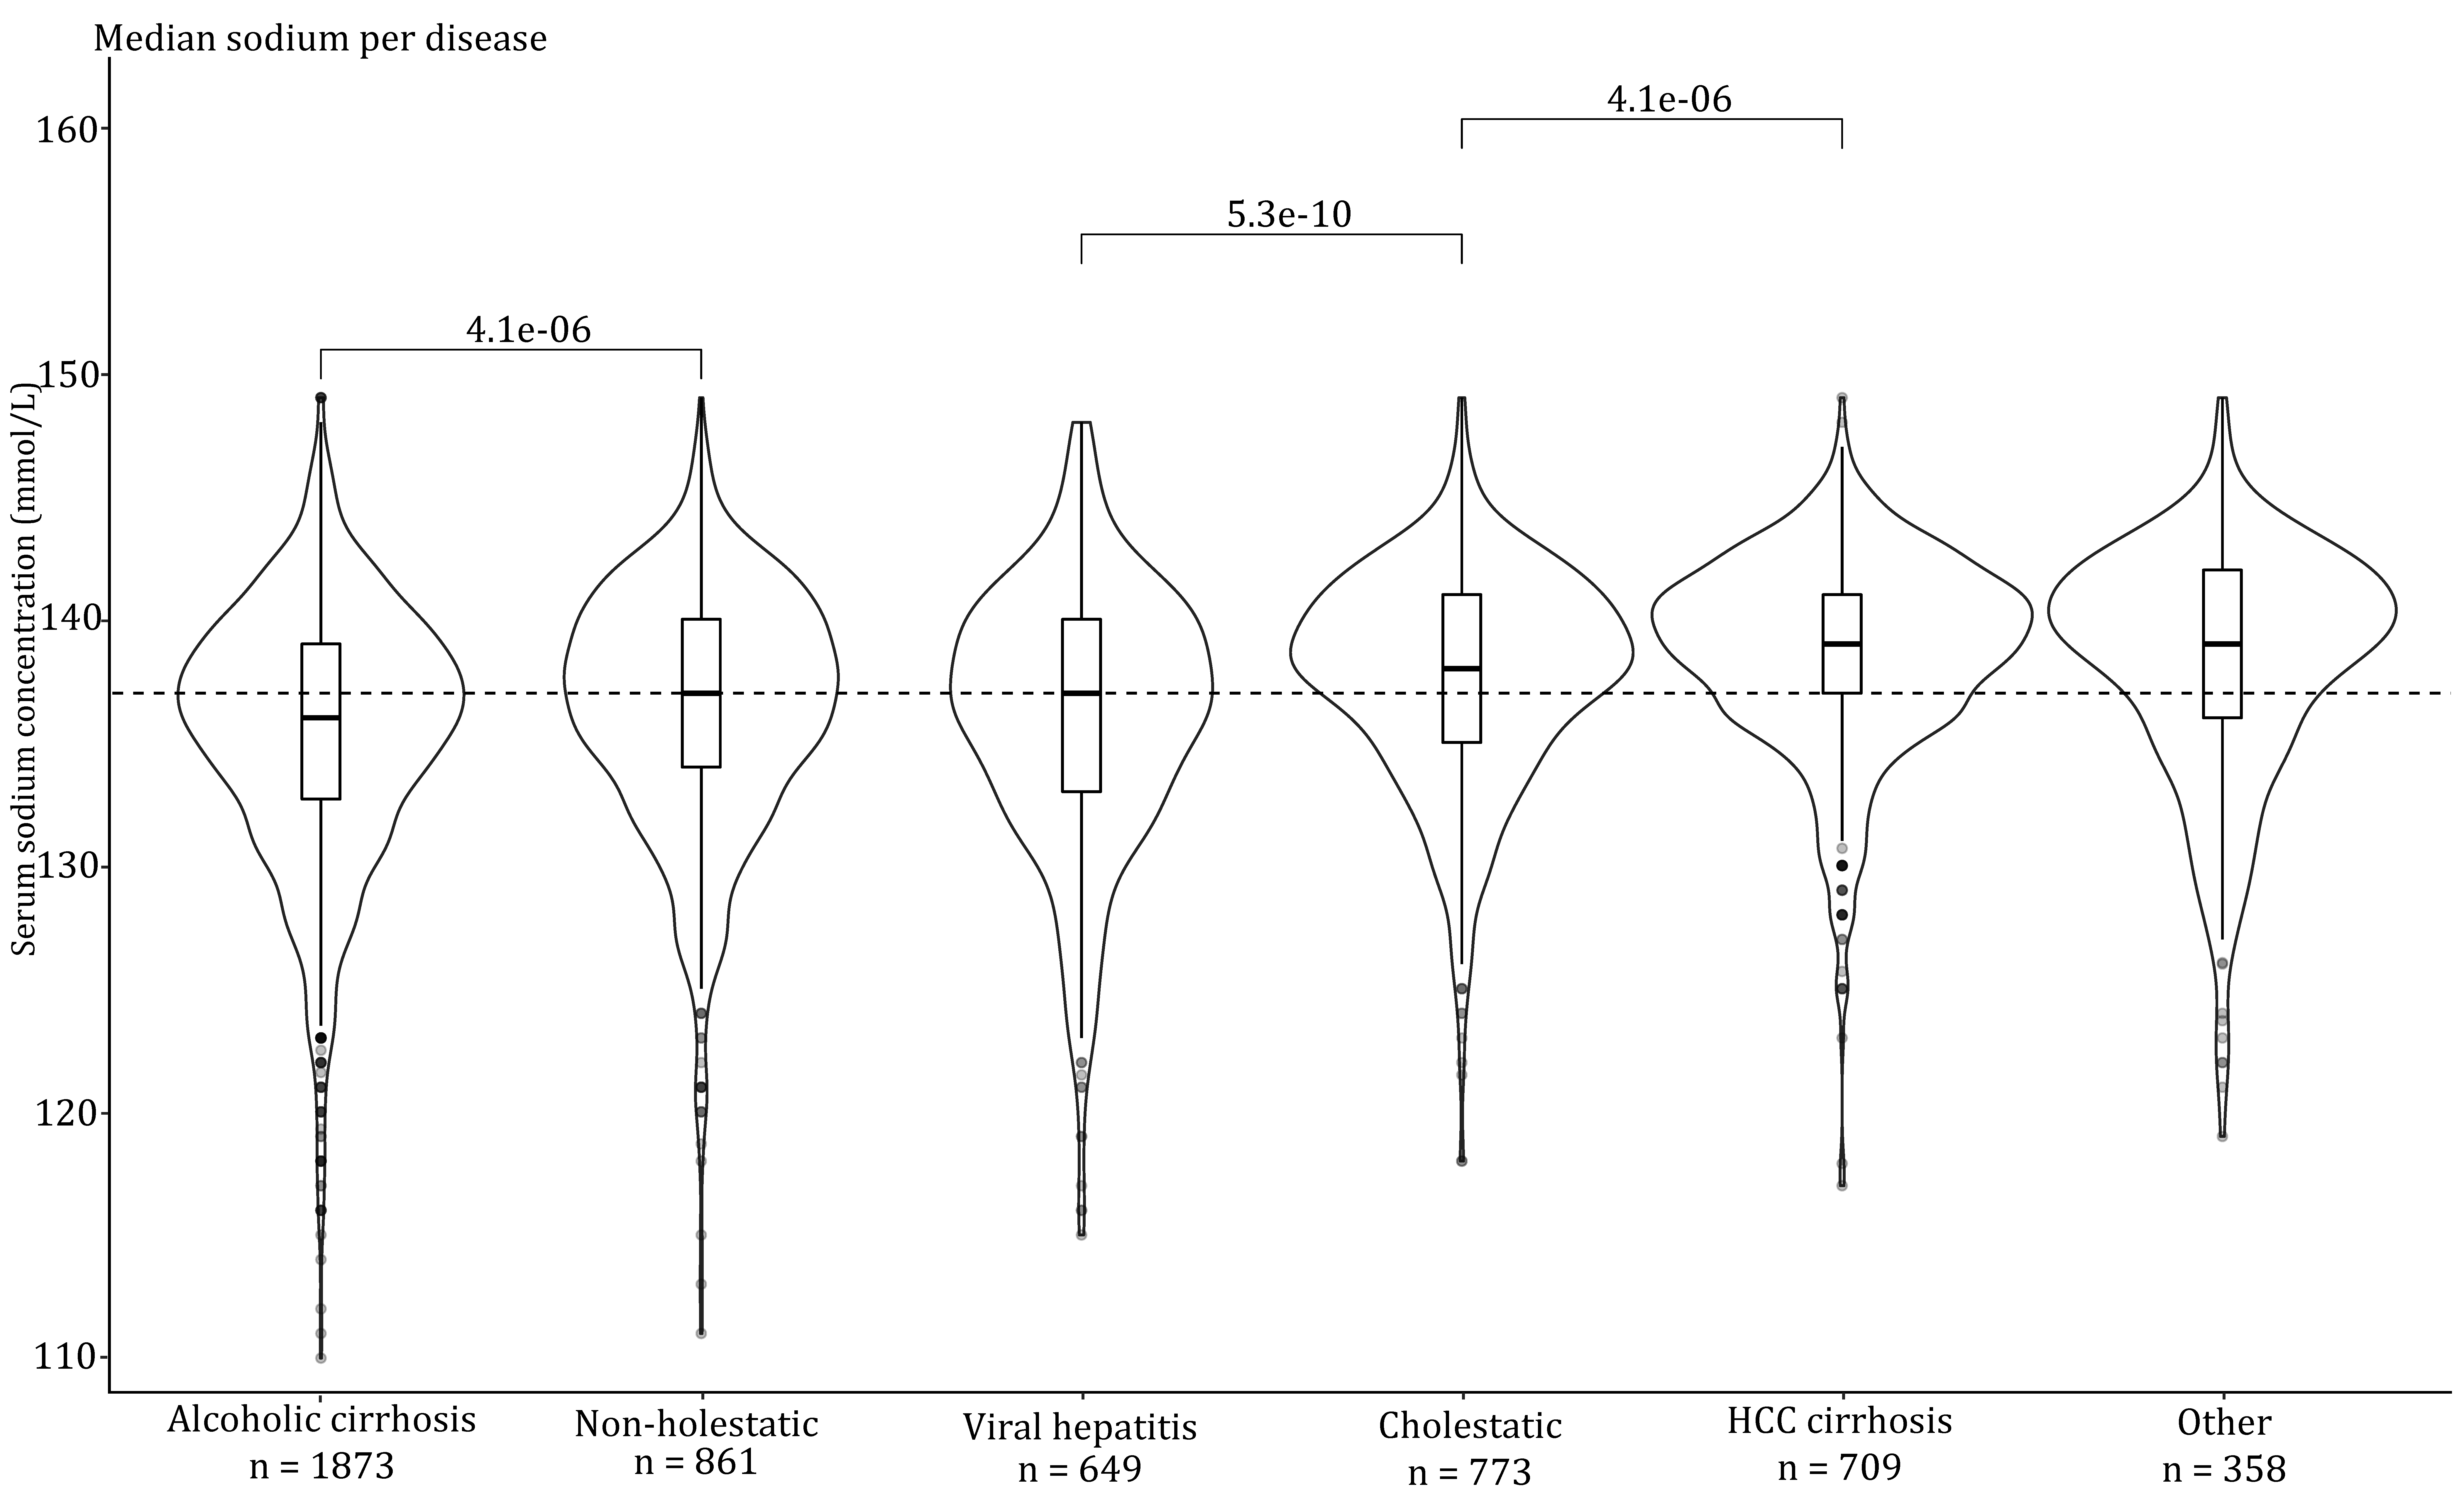 Violin plots with embedded box plots of the median serum sodium (Na) levels at listing, for the most frequent causes of liver disease. The dotted line represents the median Na of 137 mmol/L for the whole cohort. For the significant differences between Na levels, P values for pairwise comparisons are shown